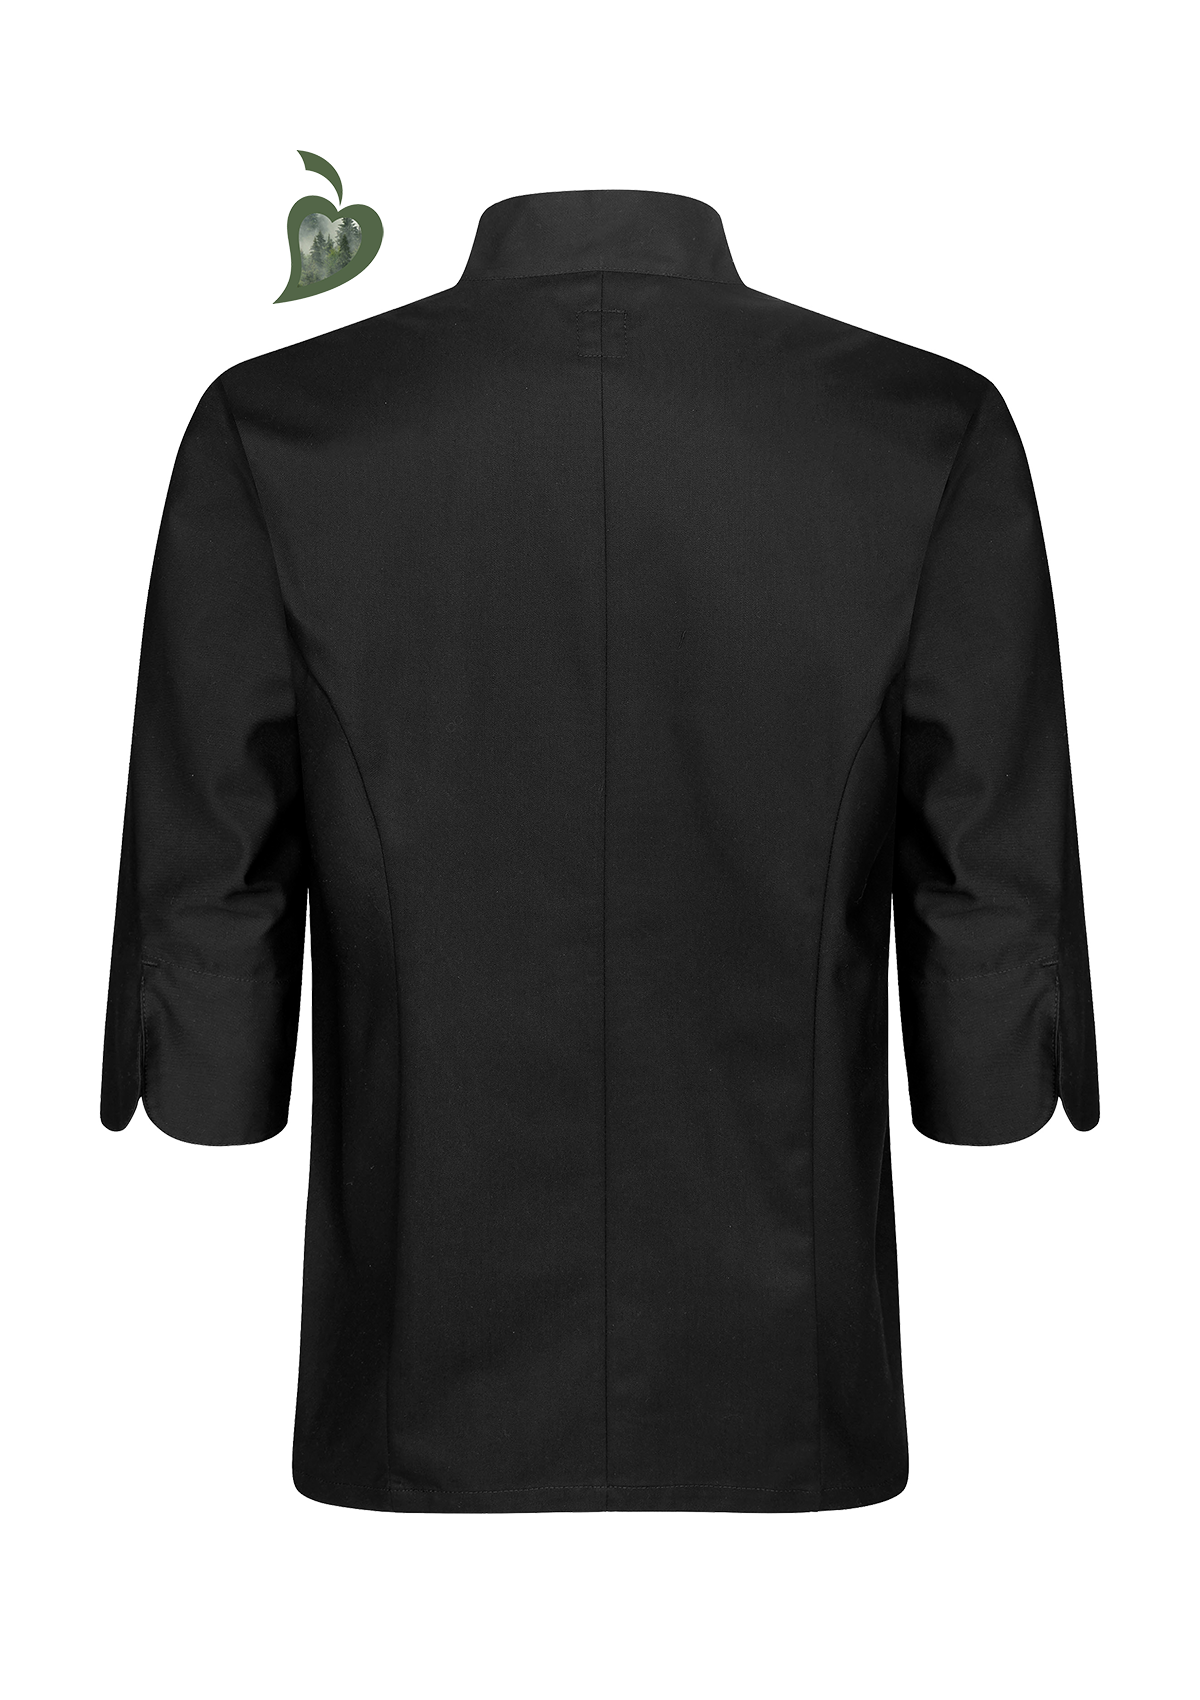 Unisex Chef's shirt Atacac with three-quarter sleeves. Segers | Cookniche